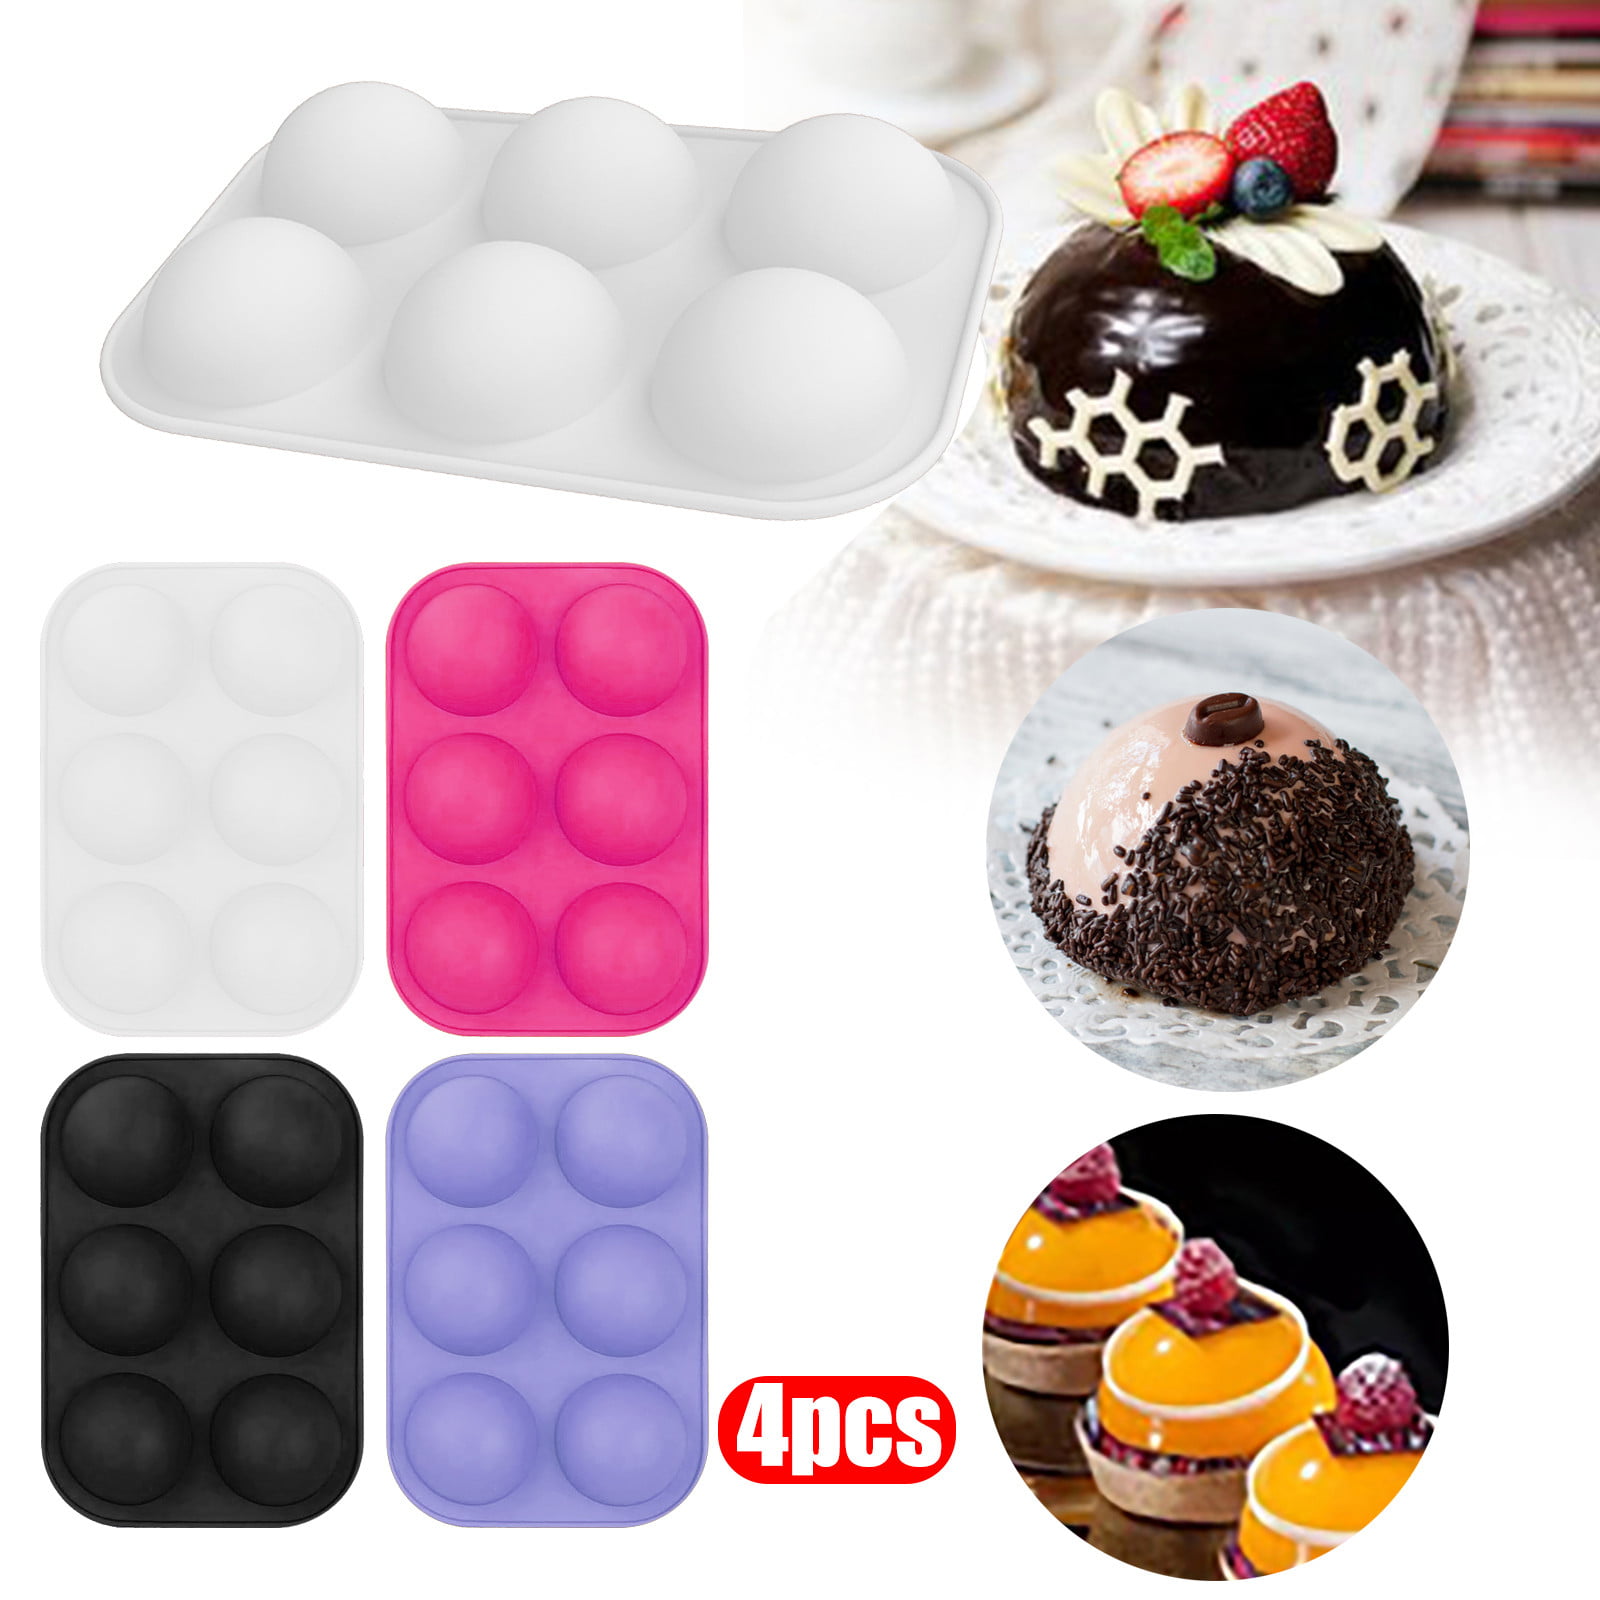 Half Ball Sphere Silicone Cake Mold Muffin Chocolate Mould Baking Pan 